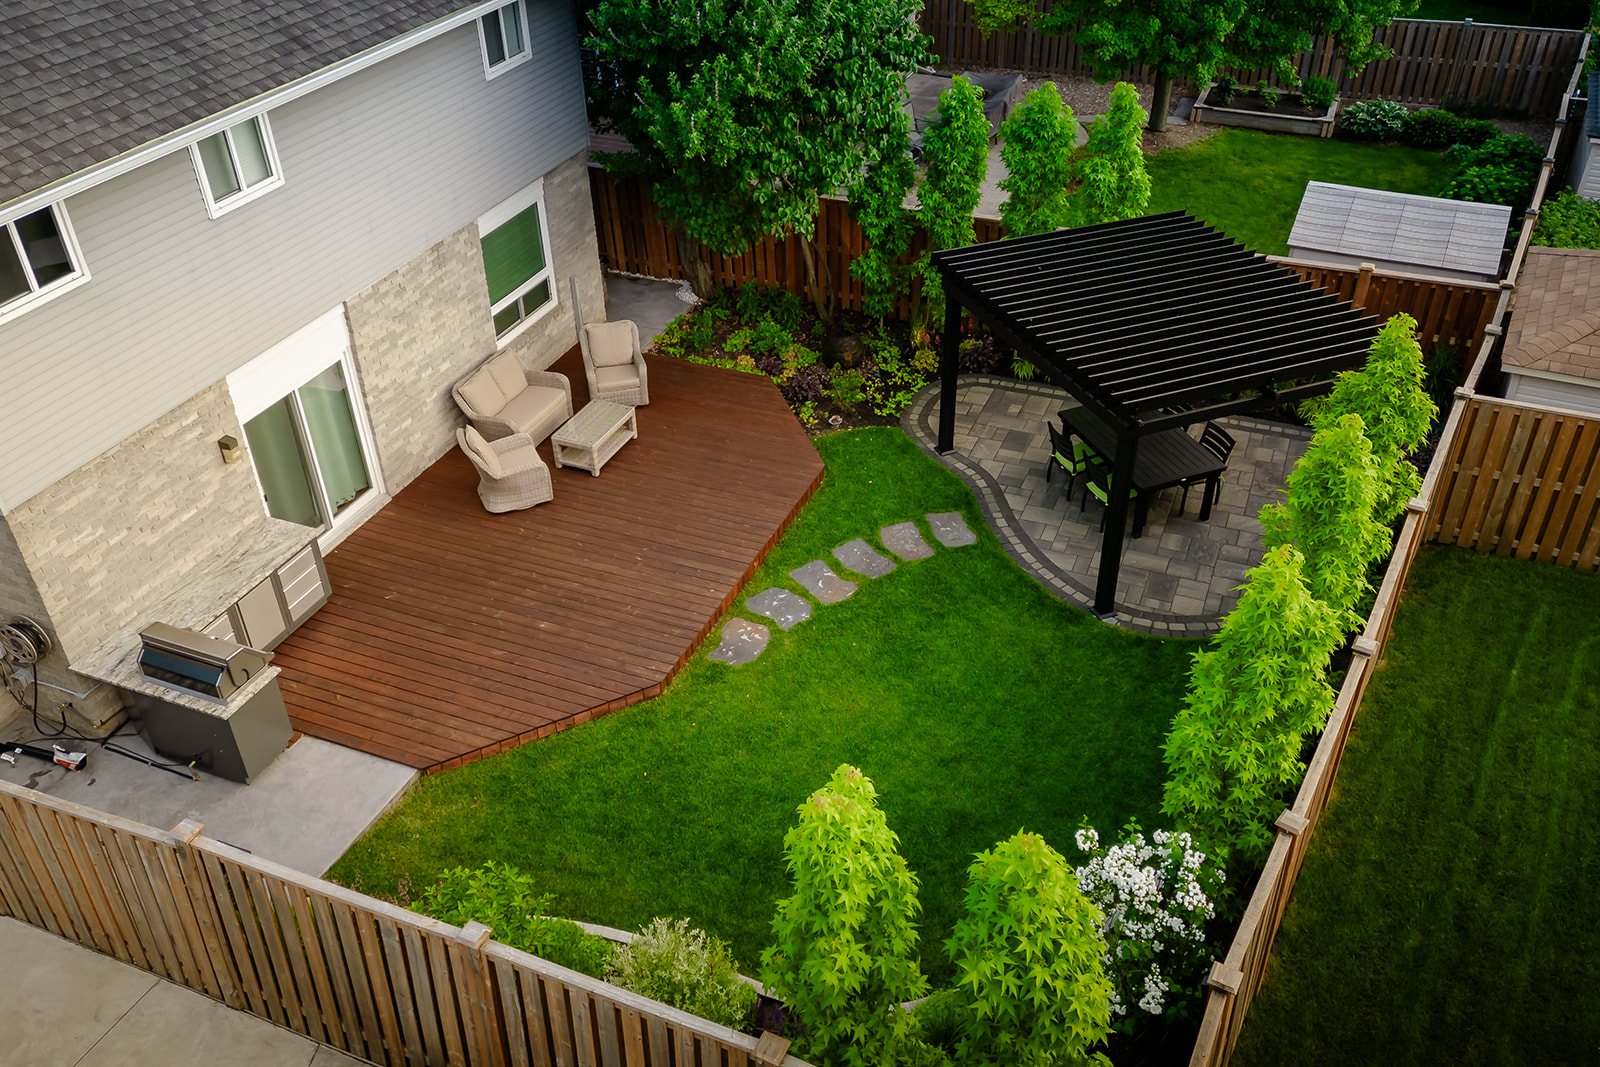 Top-down shot of the backyard with the outdoor seating area on the deck, leading out to the outdoor table.